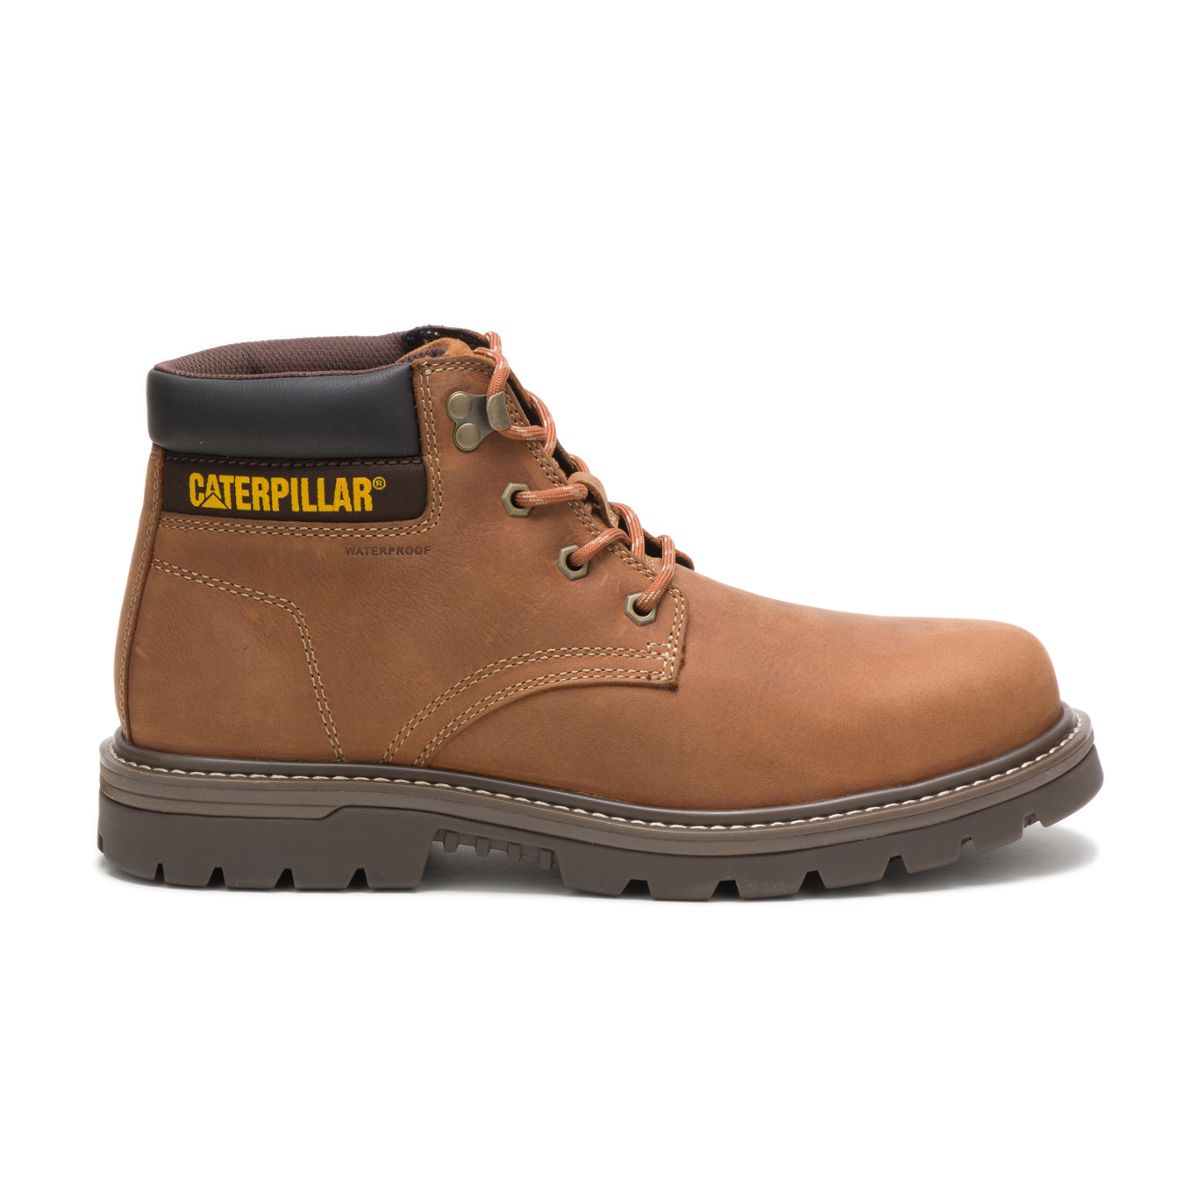 waterproof leather work boots